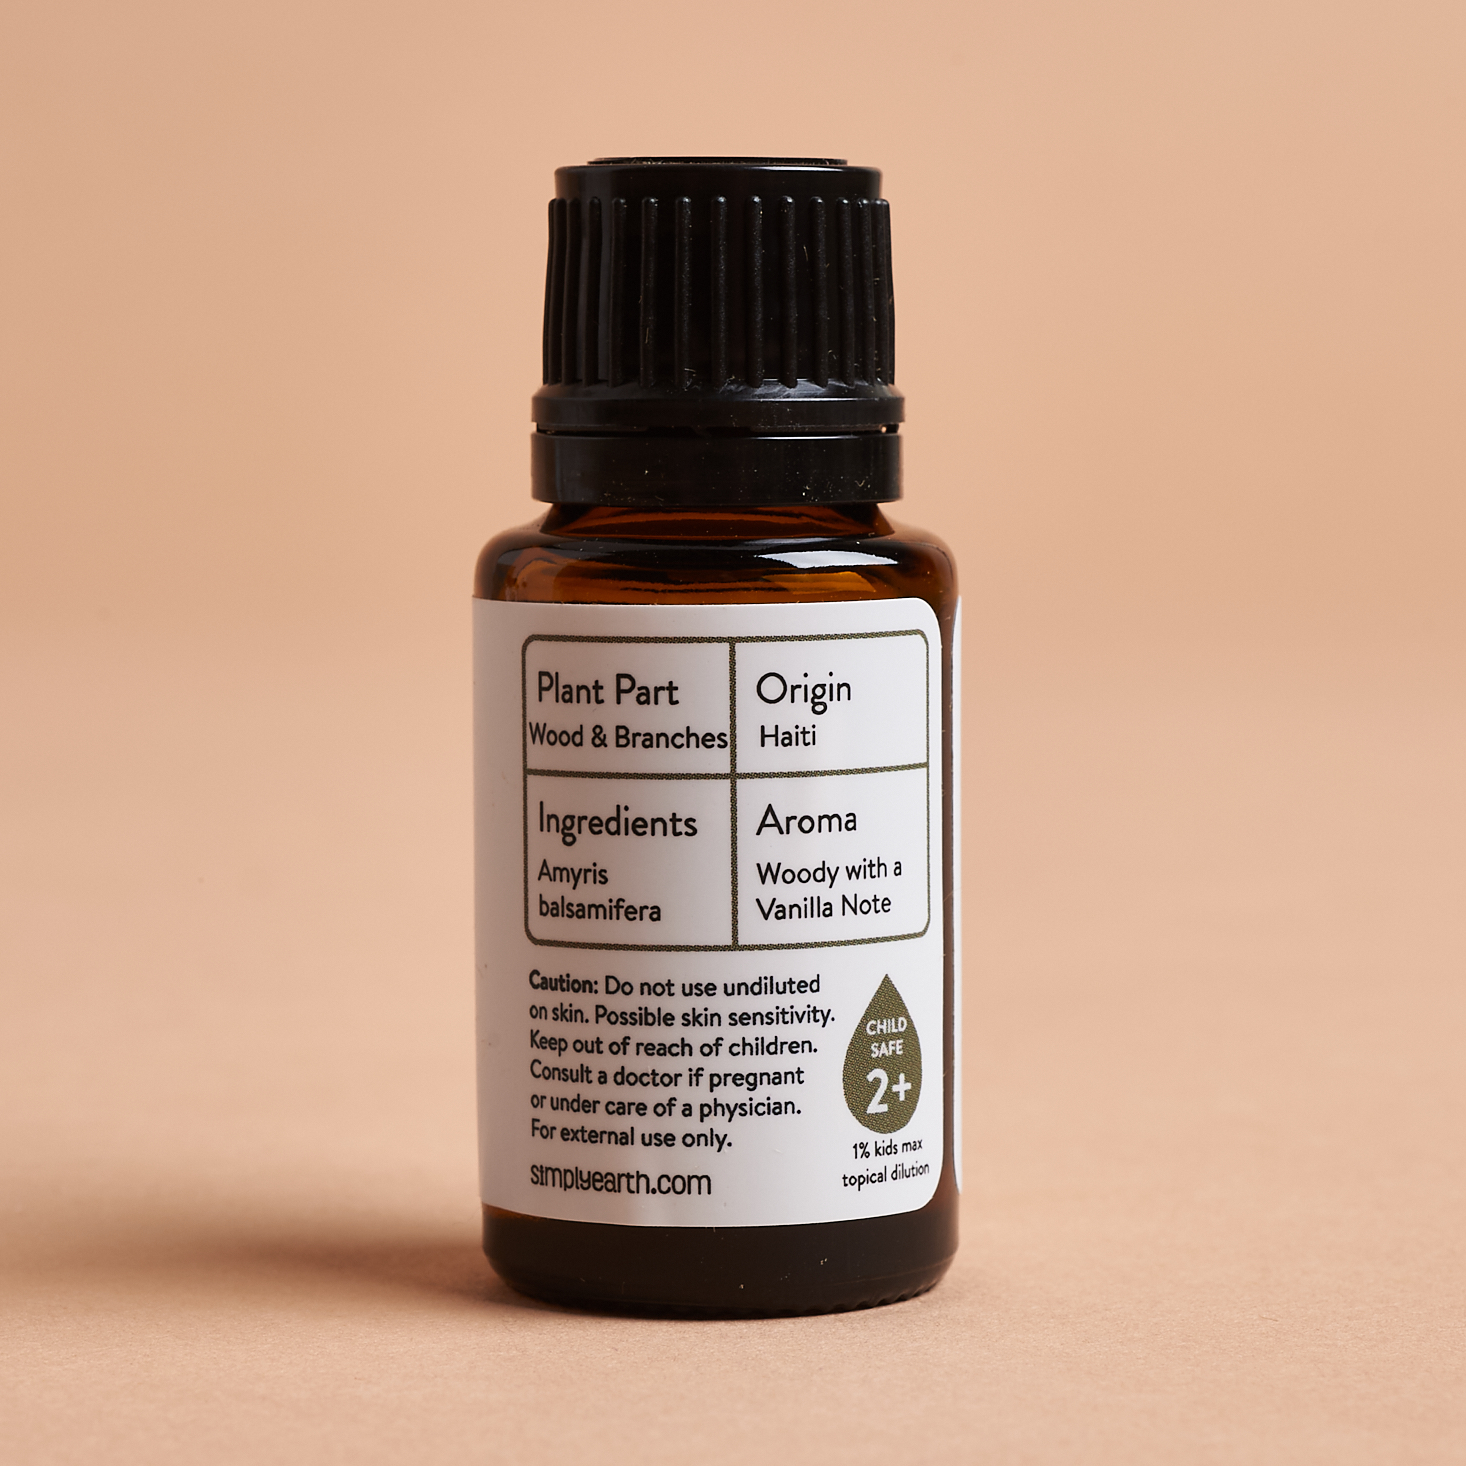 Simply Earth March 2021 amyris essential oil label